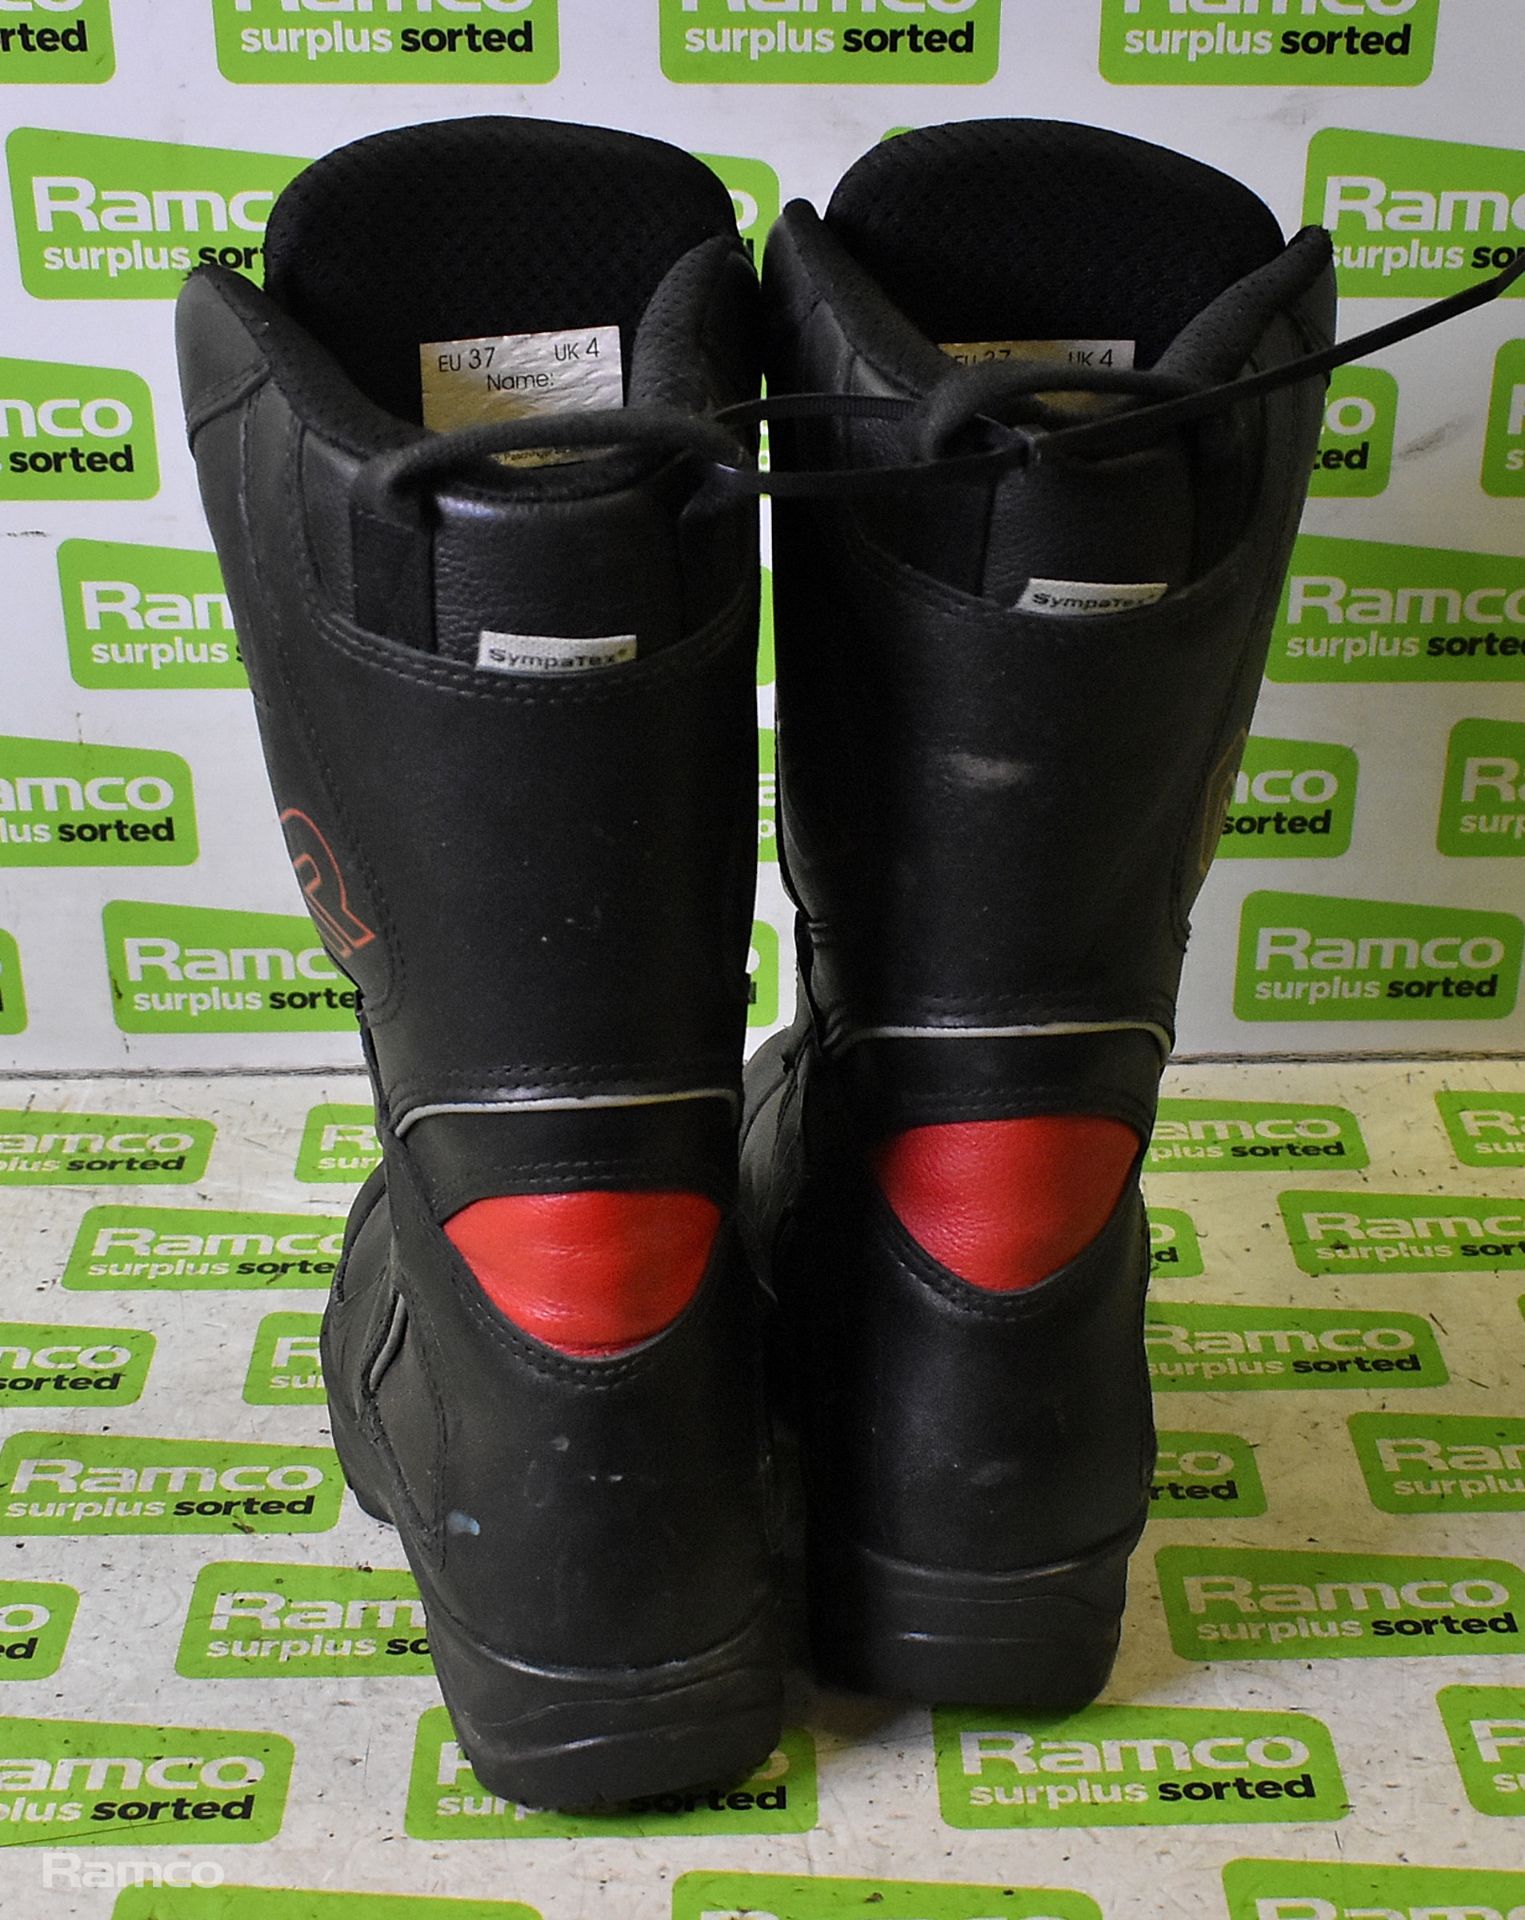 Pair of Rosenbauer boots - size 4 - Image 3 of 5